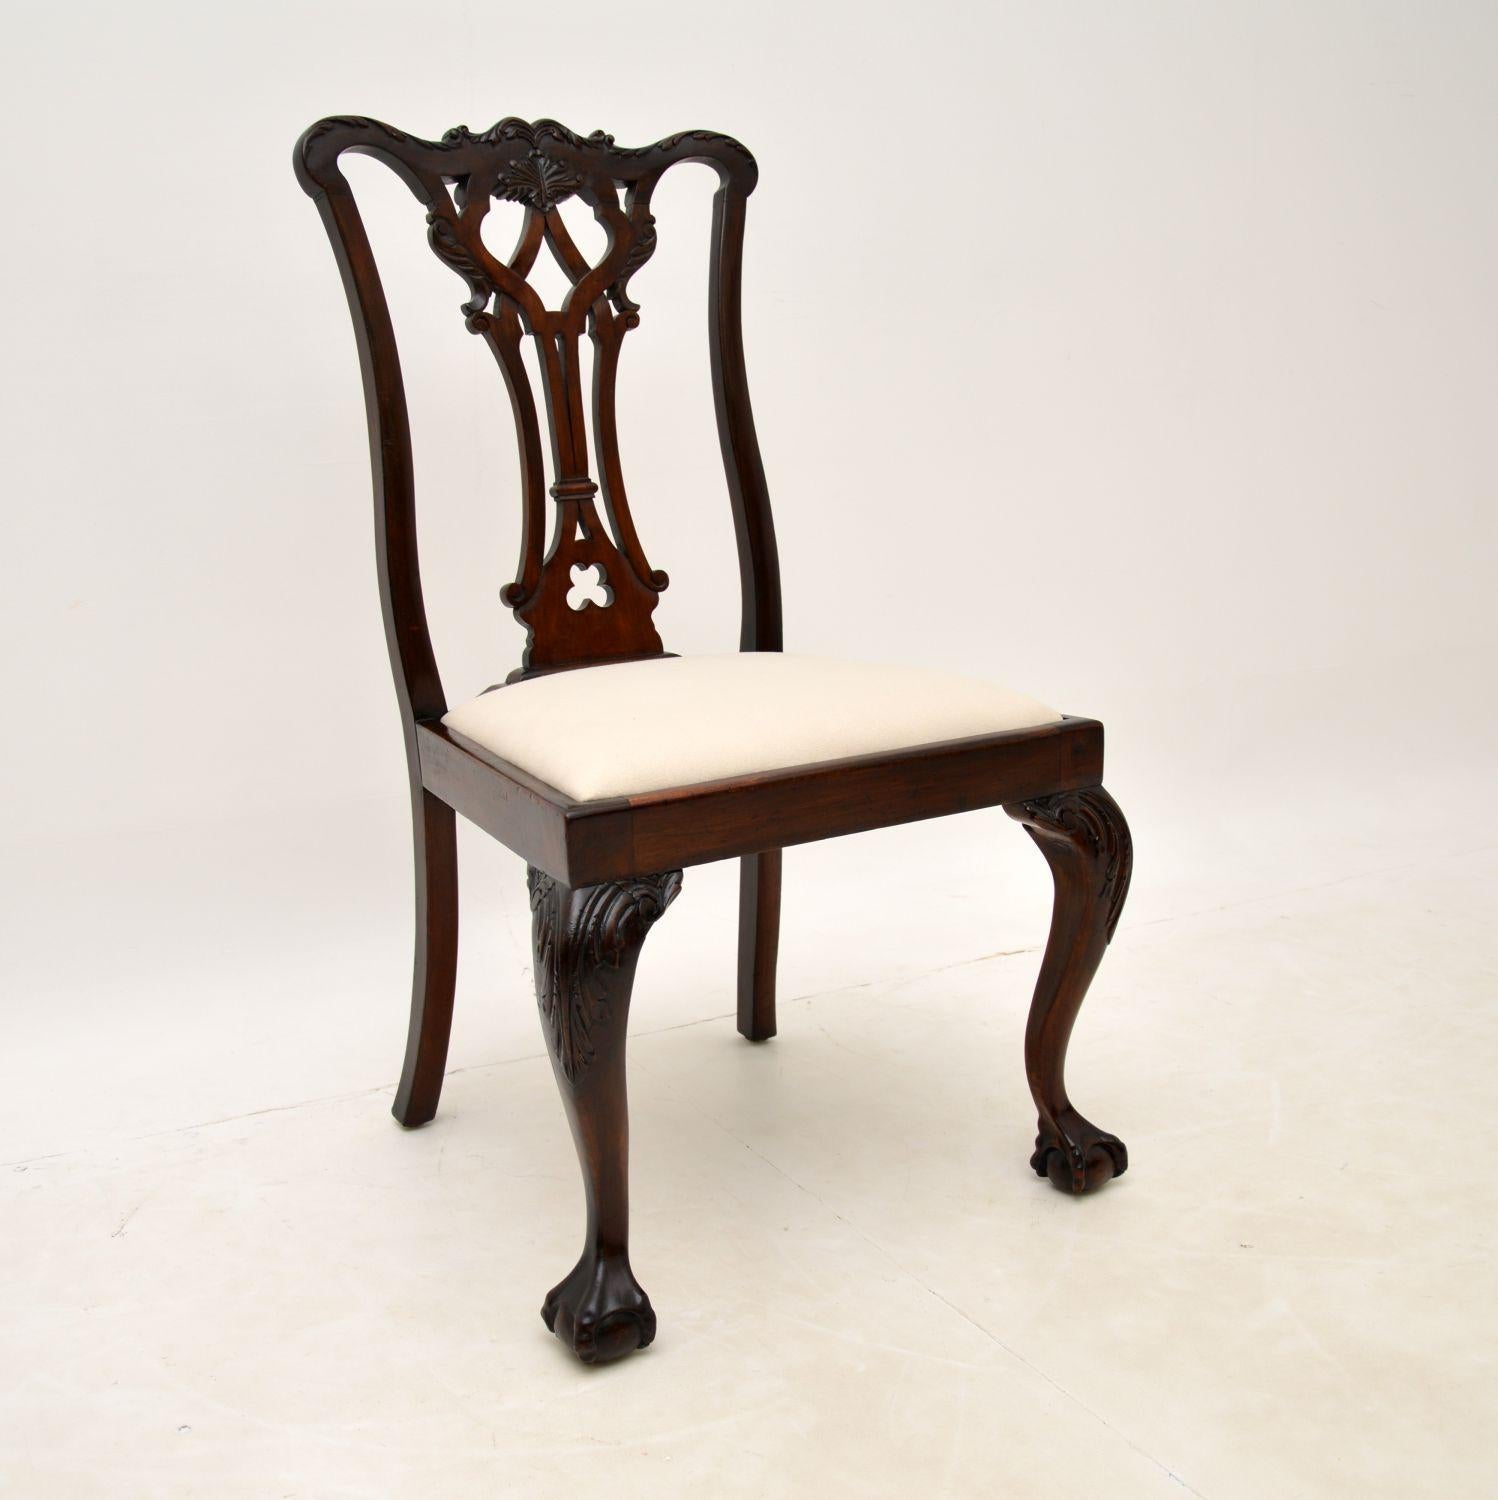 A wonderful set of antique solid mahogany English Chippendale style dining chairs, dating from around the 1880-1890’s period.

They are of excellent quality, with fine carving and lovely proportions. The knees have acanthus leaf carving, and the